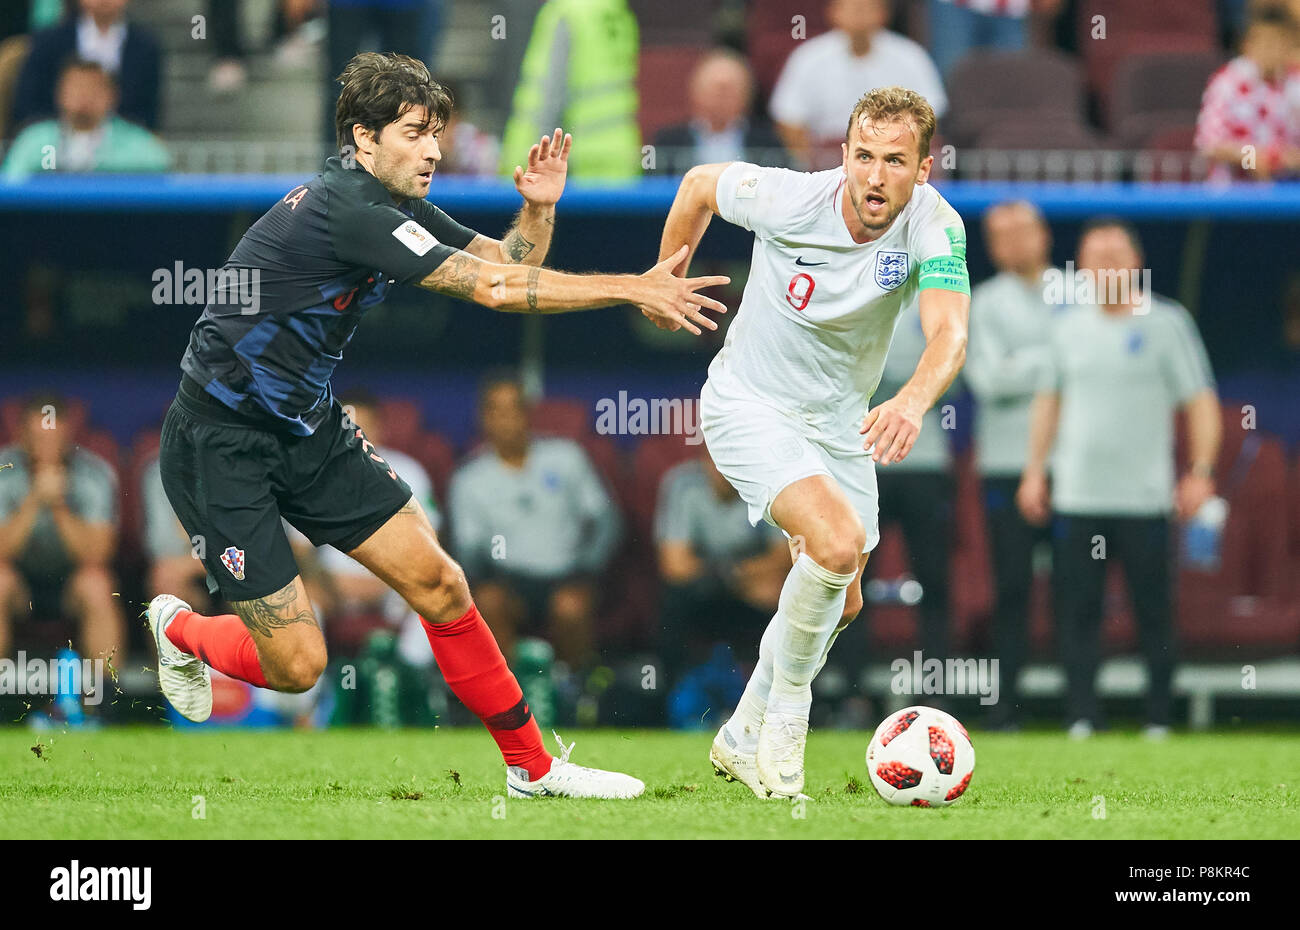 England - Croatia, Soccer, Moscow, July 11, 2018 Harry KANE, England 9   compete for the ball, tackling, duel, header against Vedran CORLUKA, Croatia Nr.5  ENGLAND  - CROATIA 1-2 Football FIFA WORLD CUP 2018 RUSSIA, Semifinal, Season 2018/2019,  July 11, 2018 in Moscow, Russia. © Peter Schatz / Alamy Live News Stock Photo